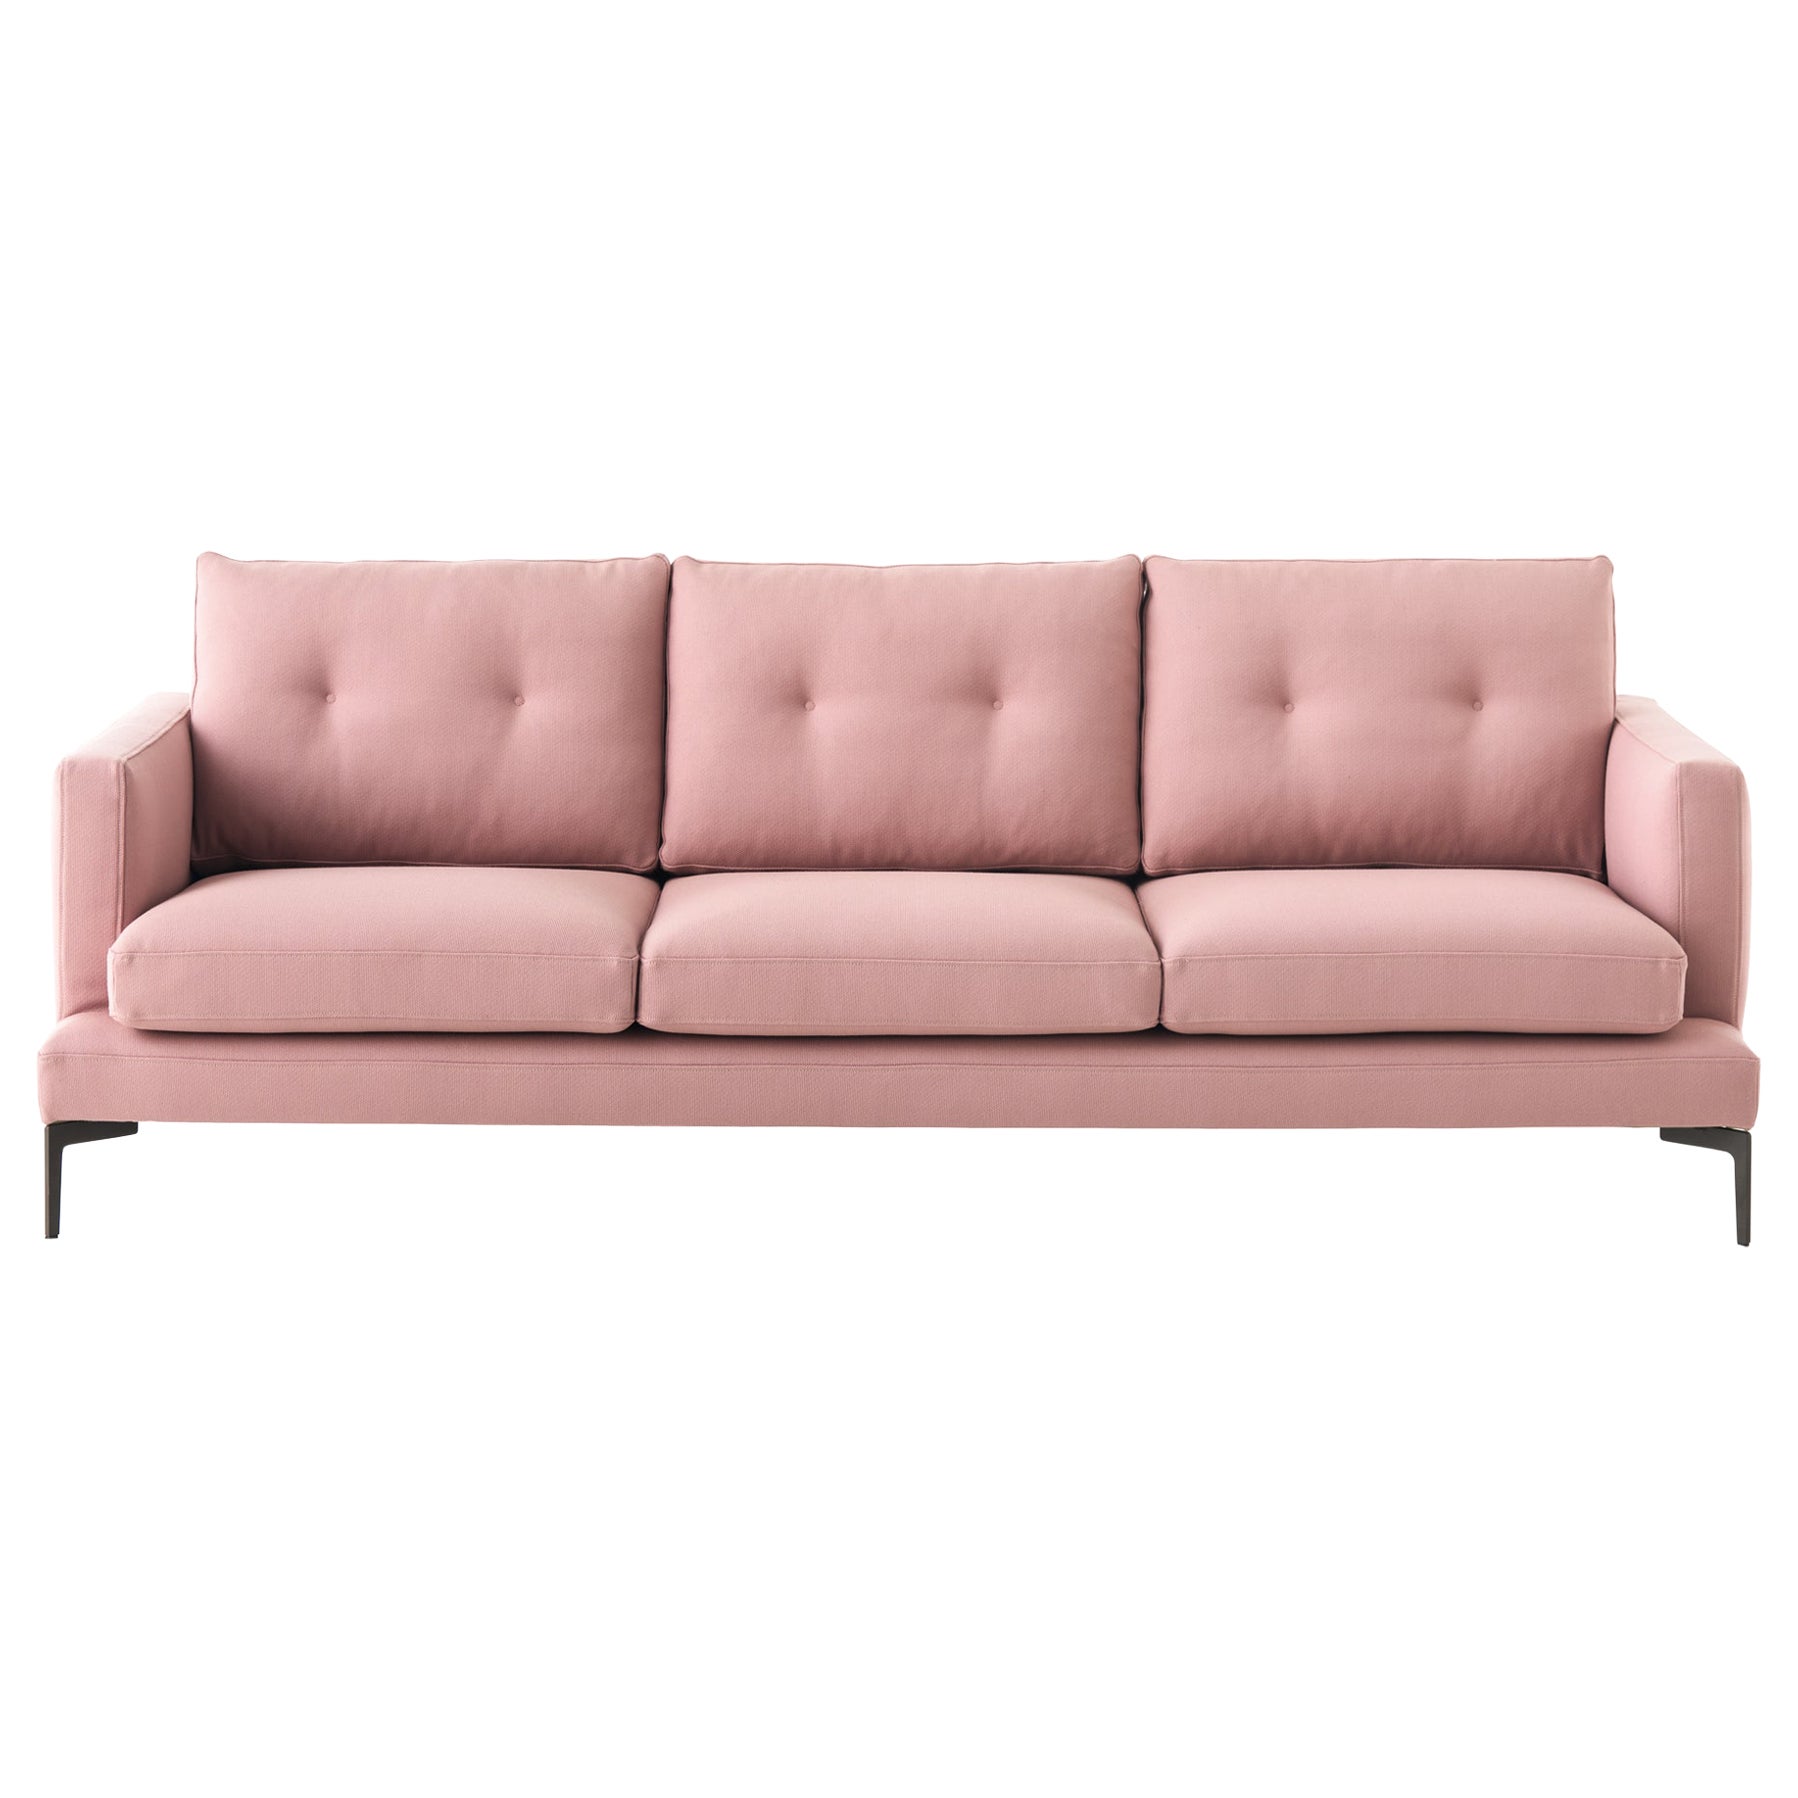 Essentiel 3-Seat 250 Sofa in Braided Pink Upholstery & Grey Legs, Sergio Bicego For Sale